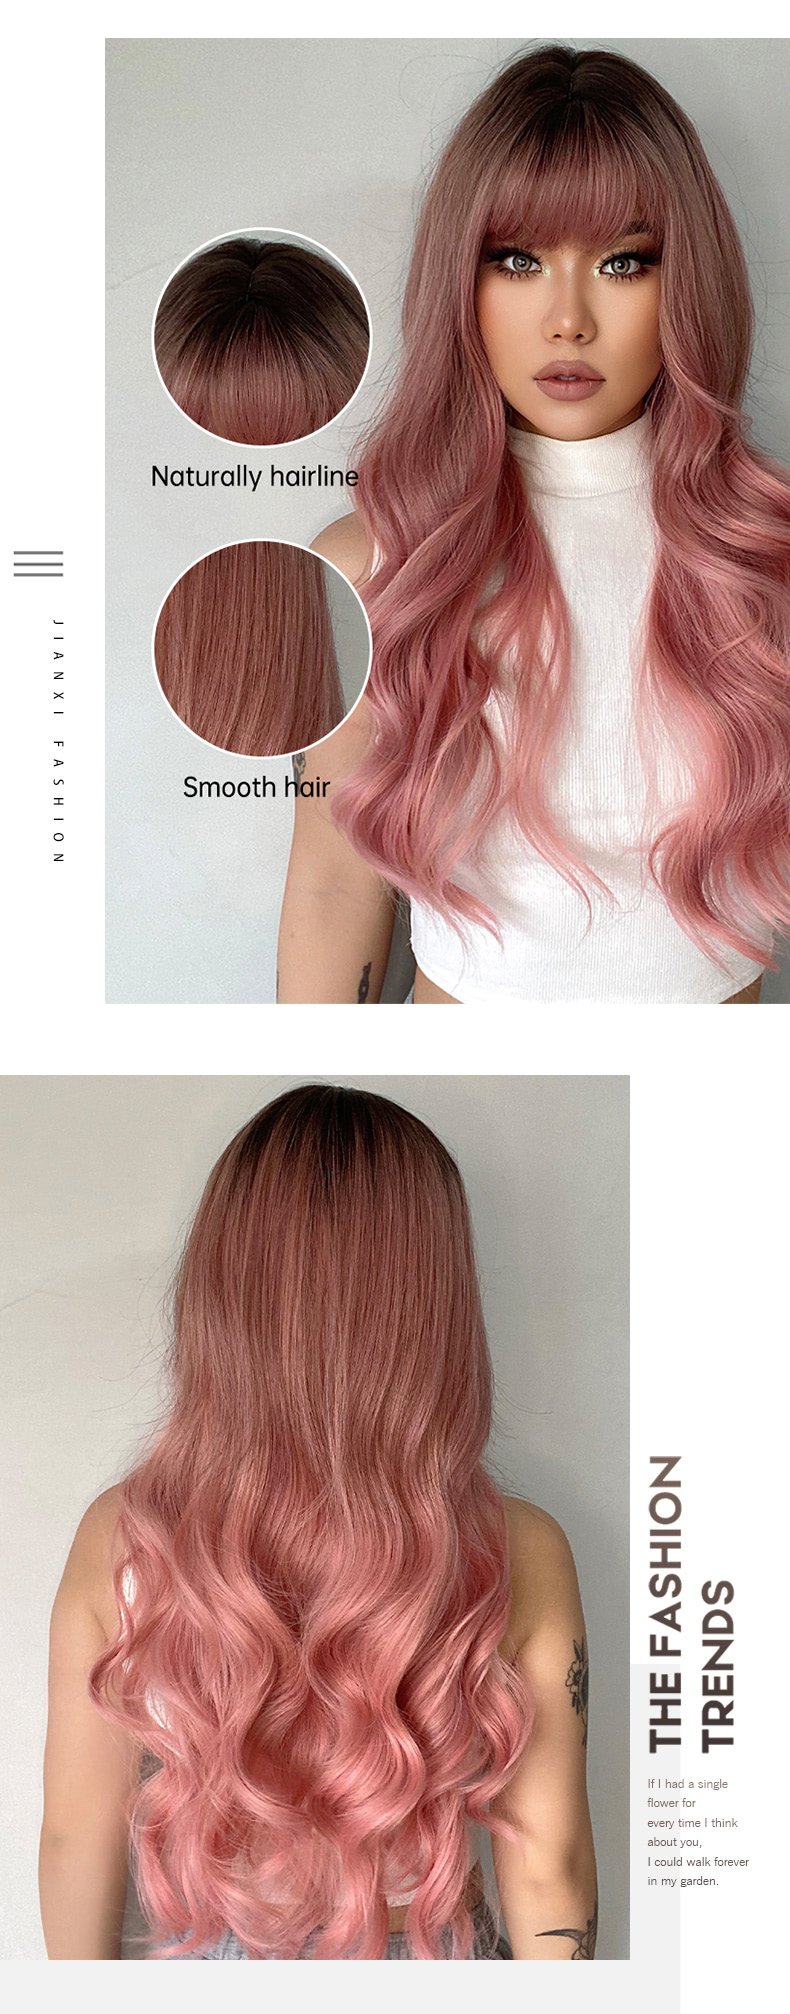 Sweet Aesthetic Pink Wave Wig with Bangs for Women Girl09